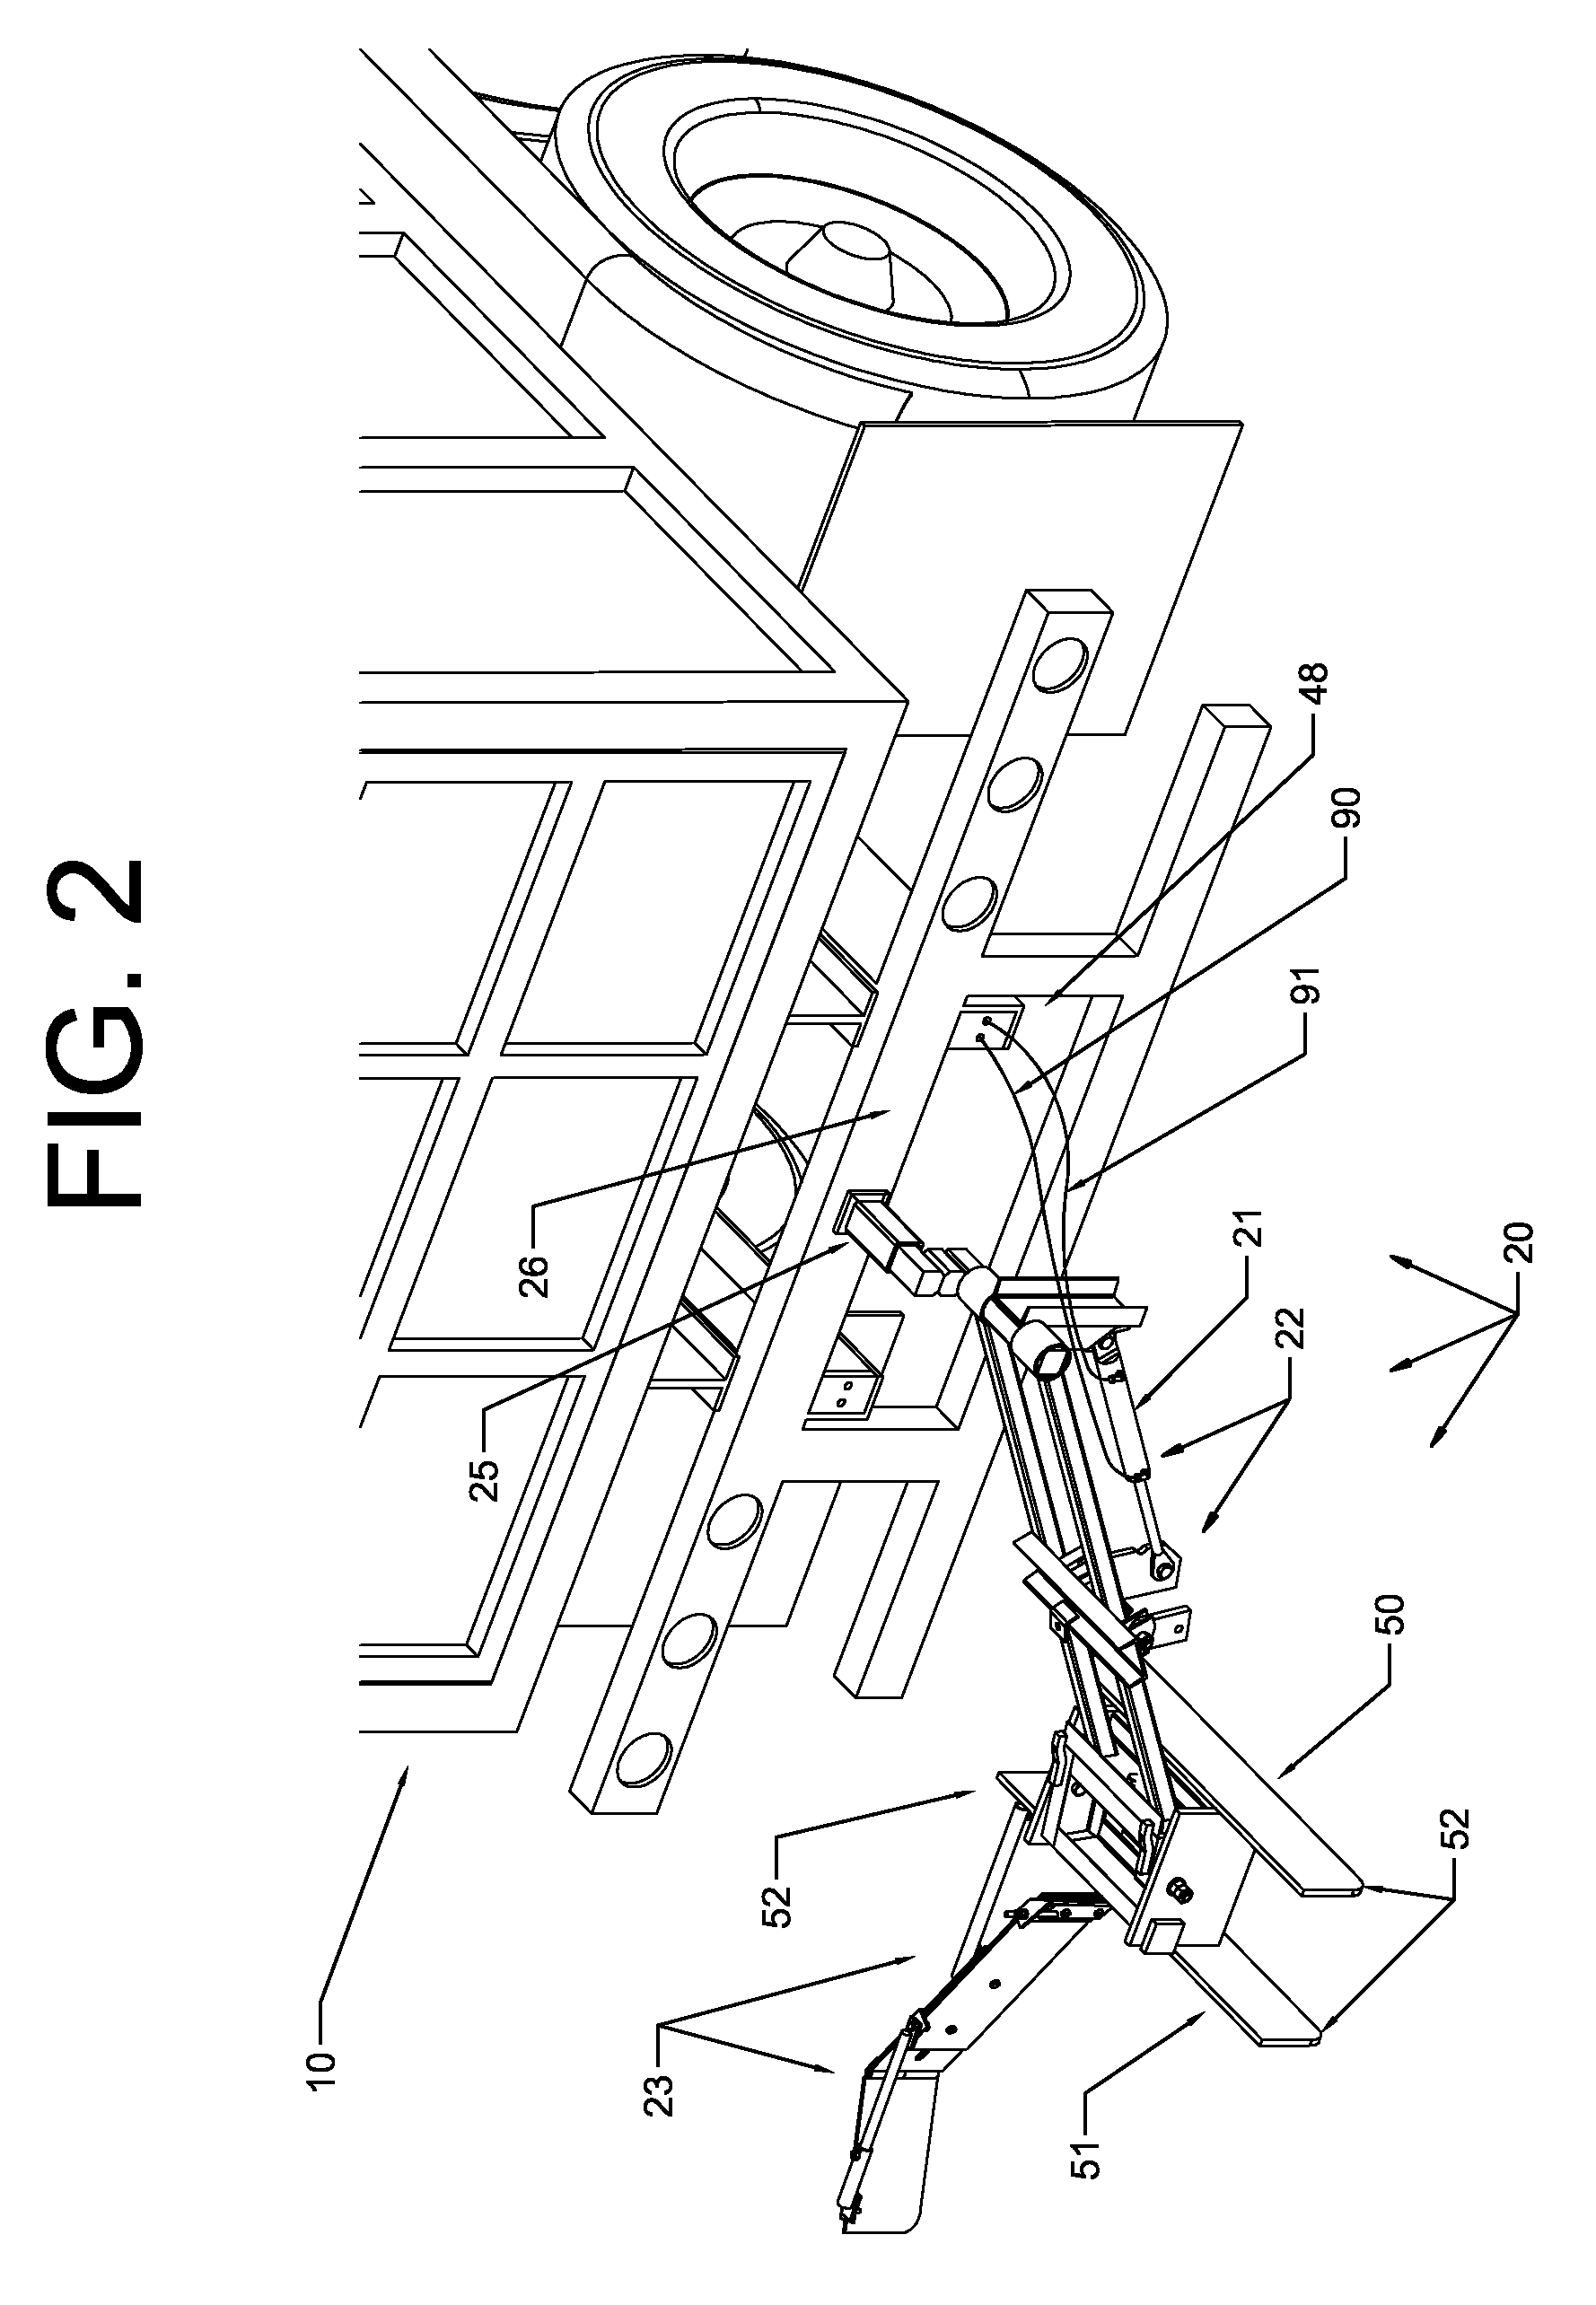 Adjustable method and apparatus for laying, leveling and compacting road shoulders